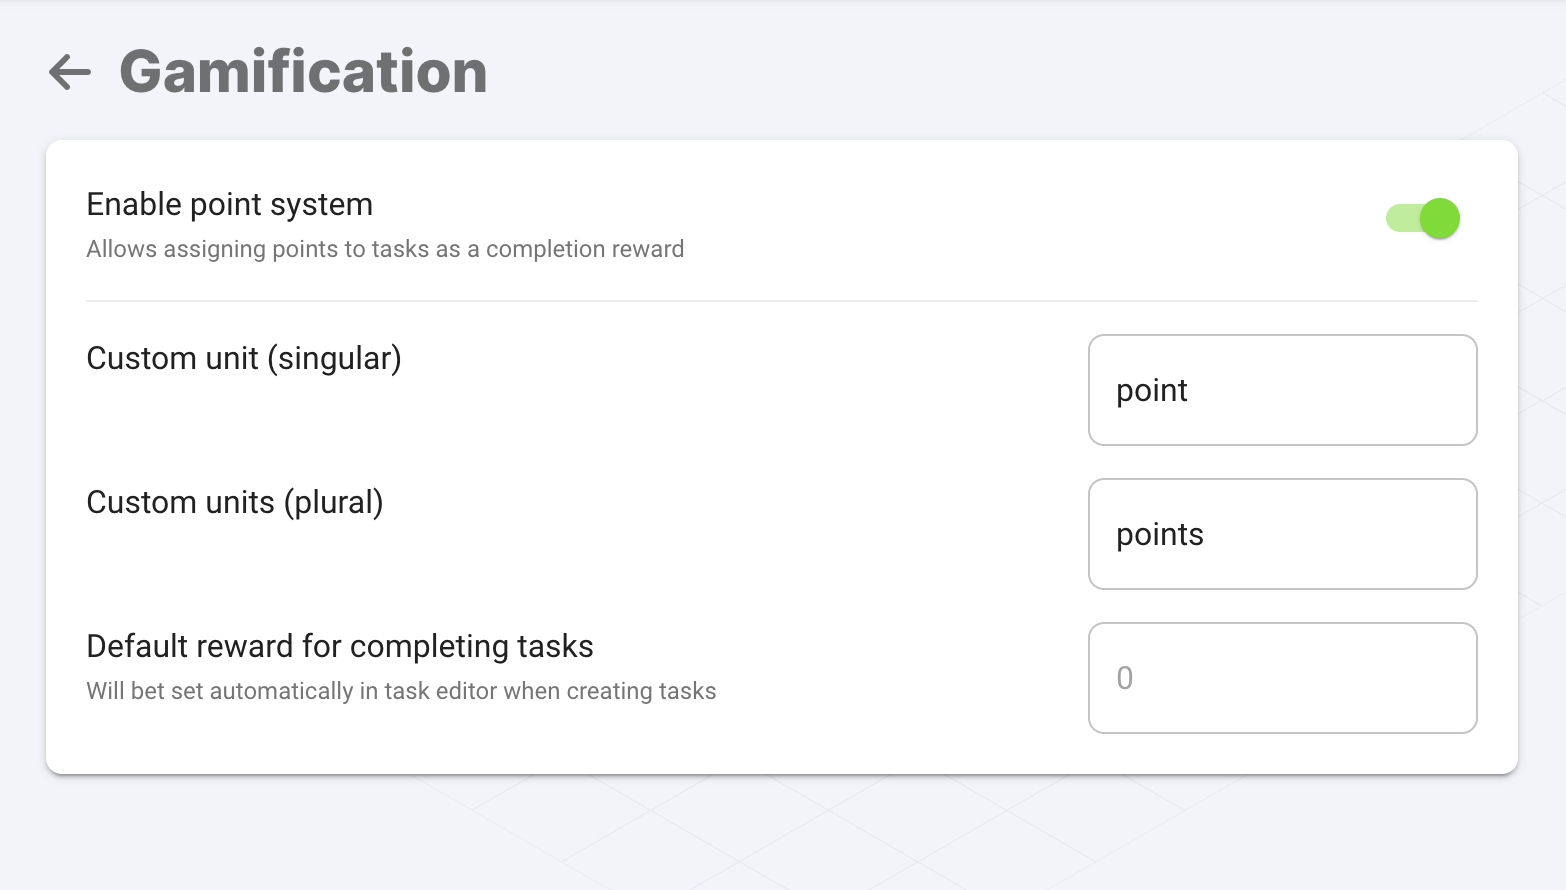 Screenshot of gamification settings in a productivity app